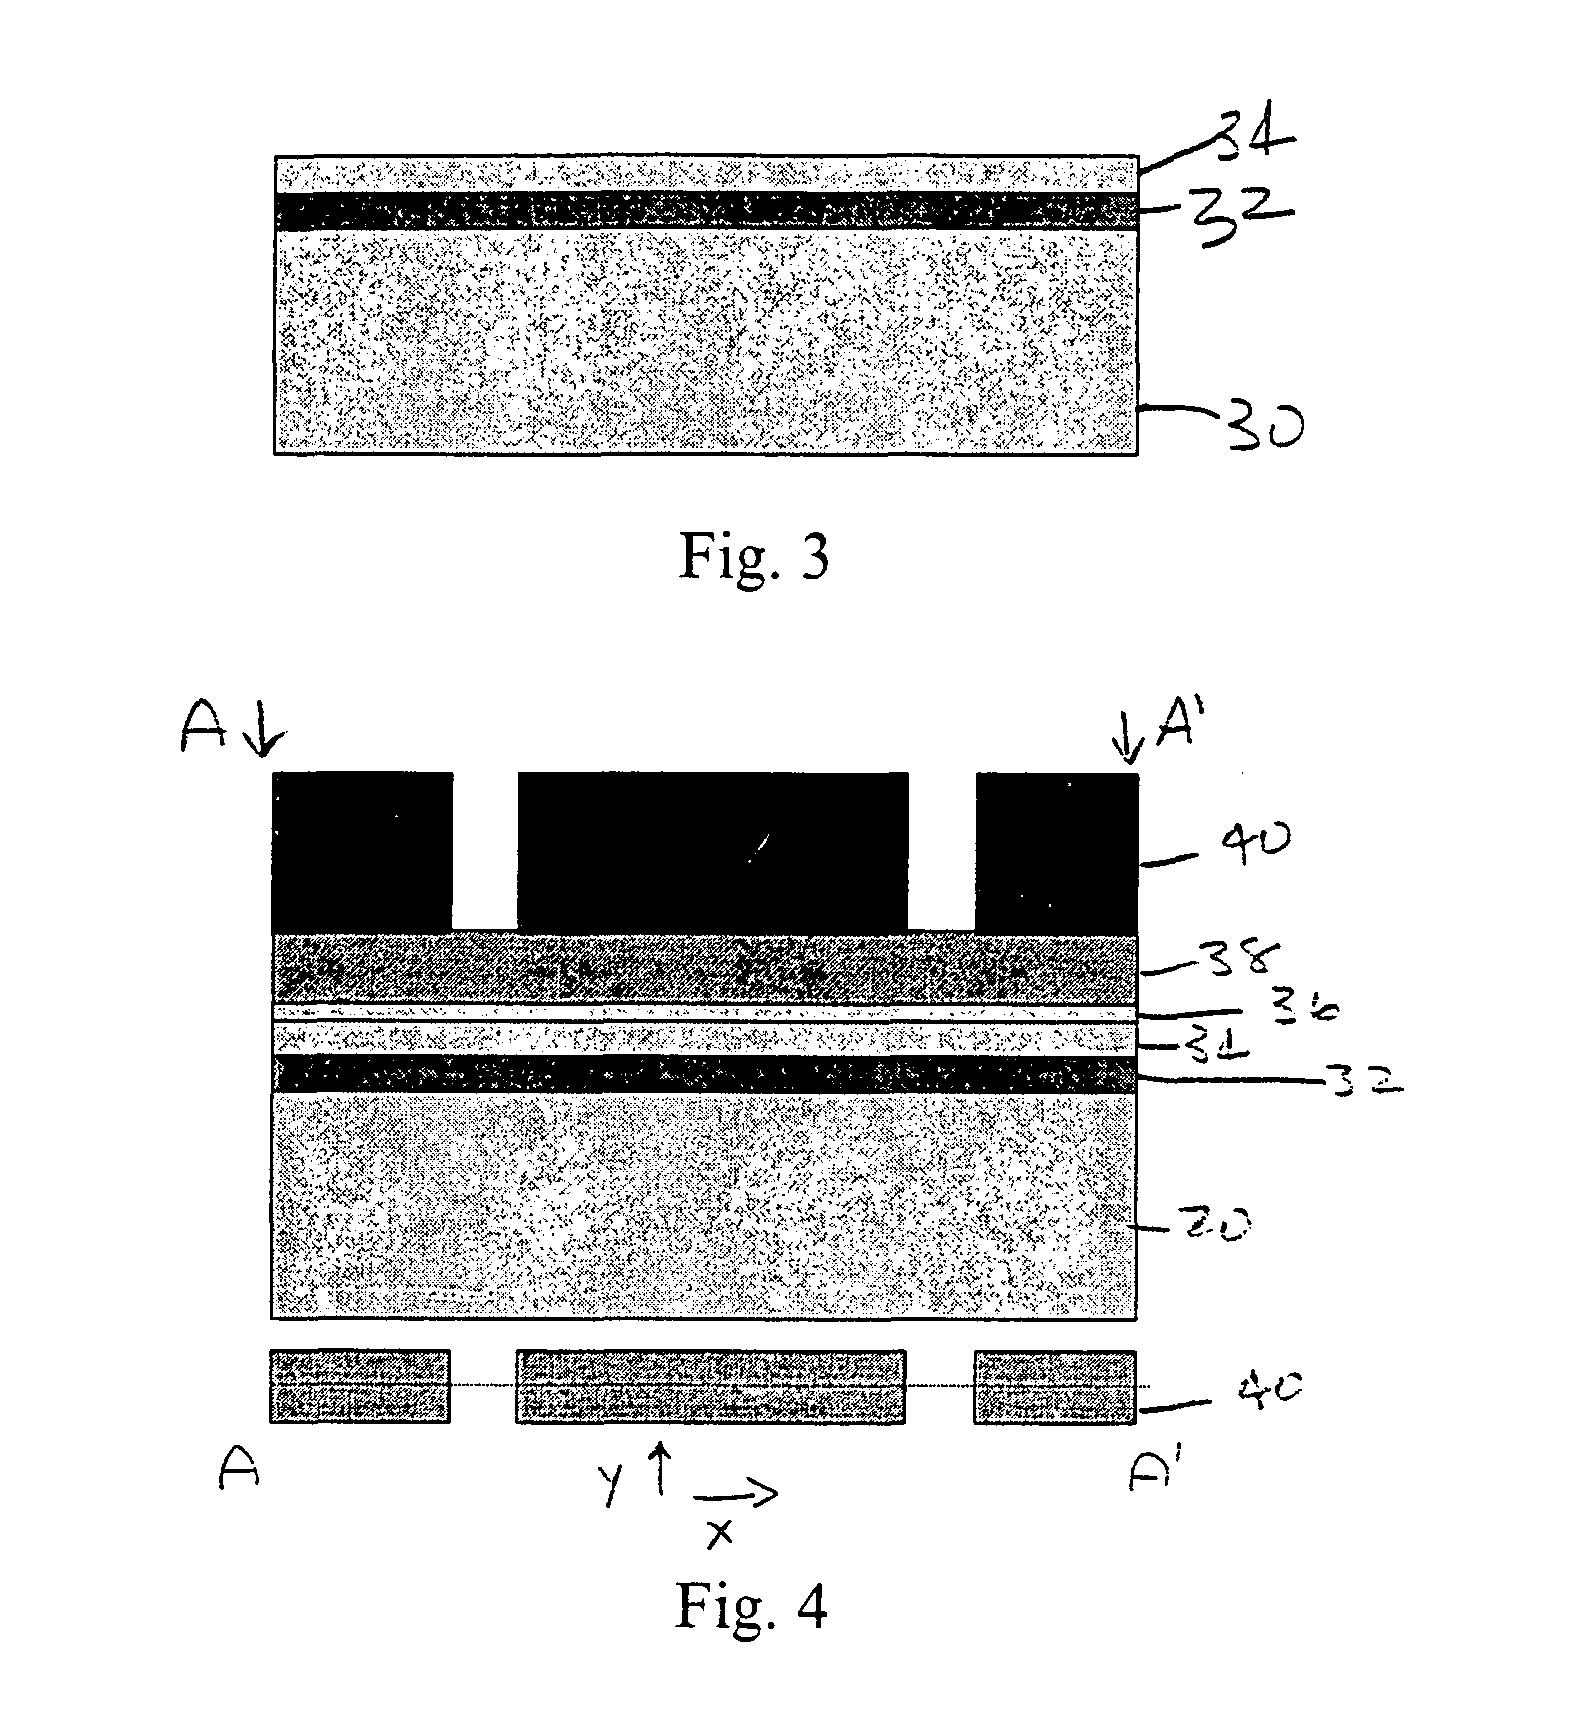 Fabrication of silicon-on-nothing (SON) MOSFET fabrication using selective etching of Si1-xGex layer